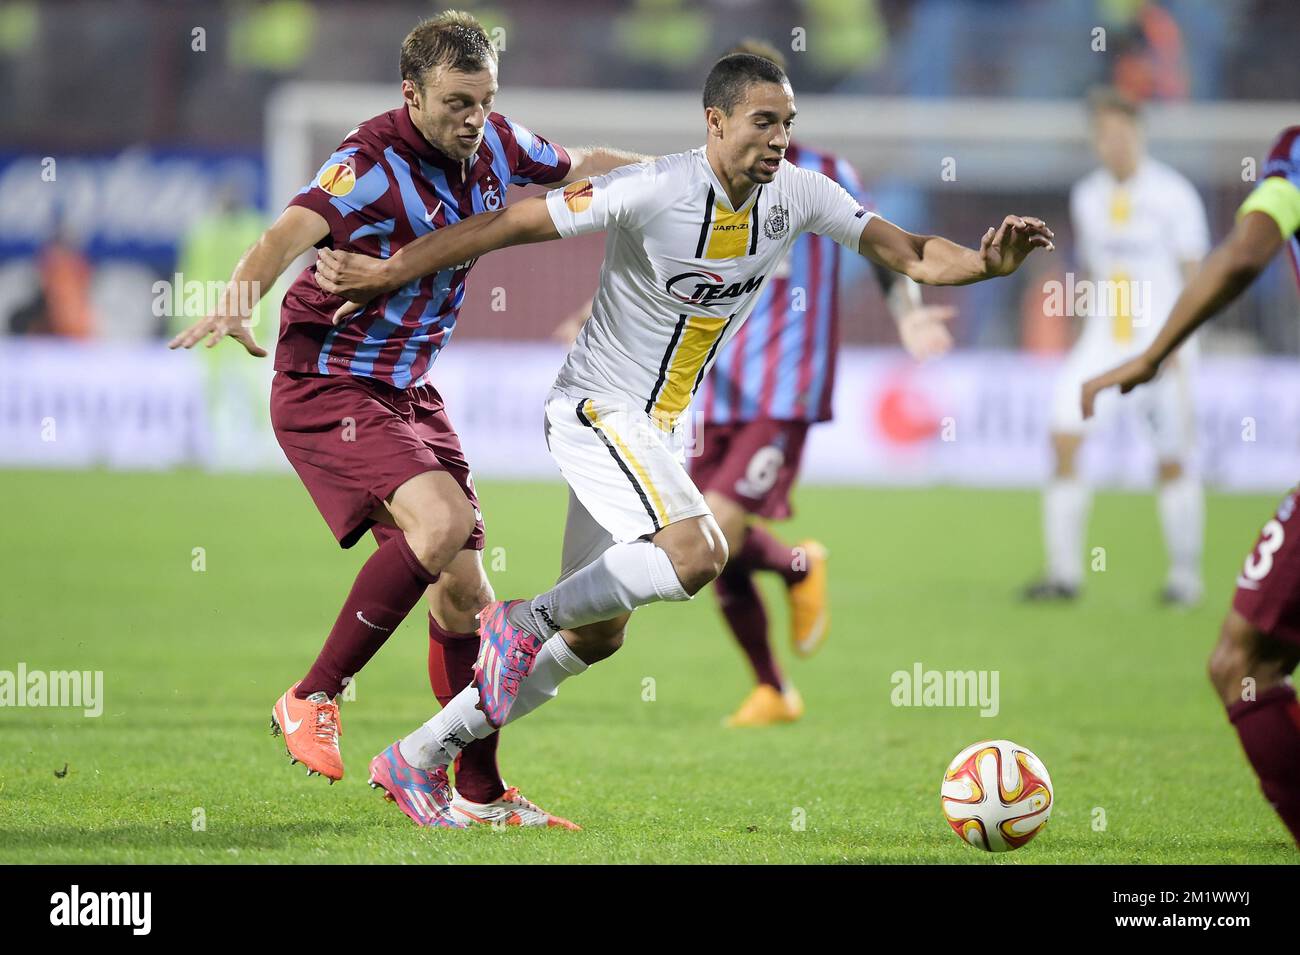 20141023 - TRABZON, TURKEY: Trabzonspor's Avraam Papadopoulos and Lokeren's Nill De Pauw fight for the ball during a game between Turkish club Trabzonspor AS and Belgian soccer team KSC Lokeren OVL in the Huseyin Avni Aker Stadium in Trabzon, Thursday 23 October 2014. It is the third day of the group stage of the UEFA Europa League competition, in group L. BELGA PHOTO YORICK JANSENS Stock Photo